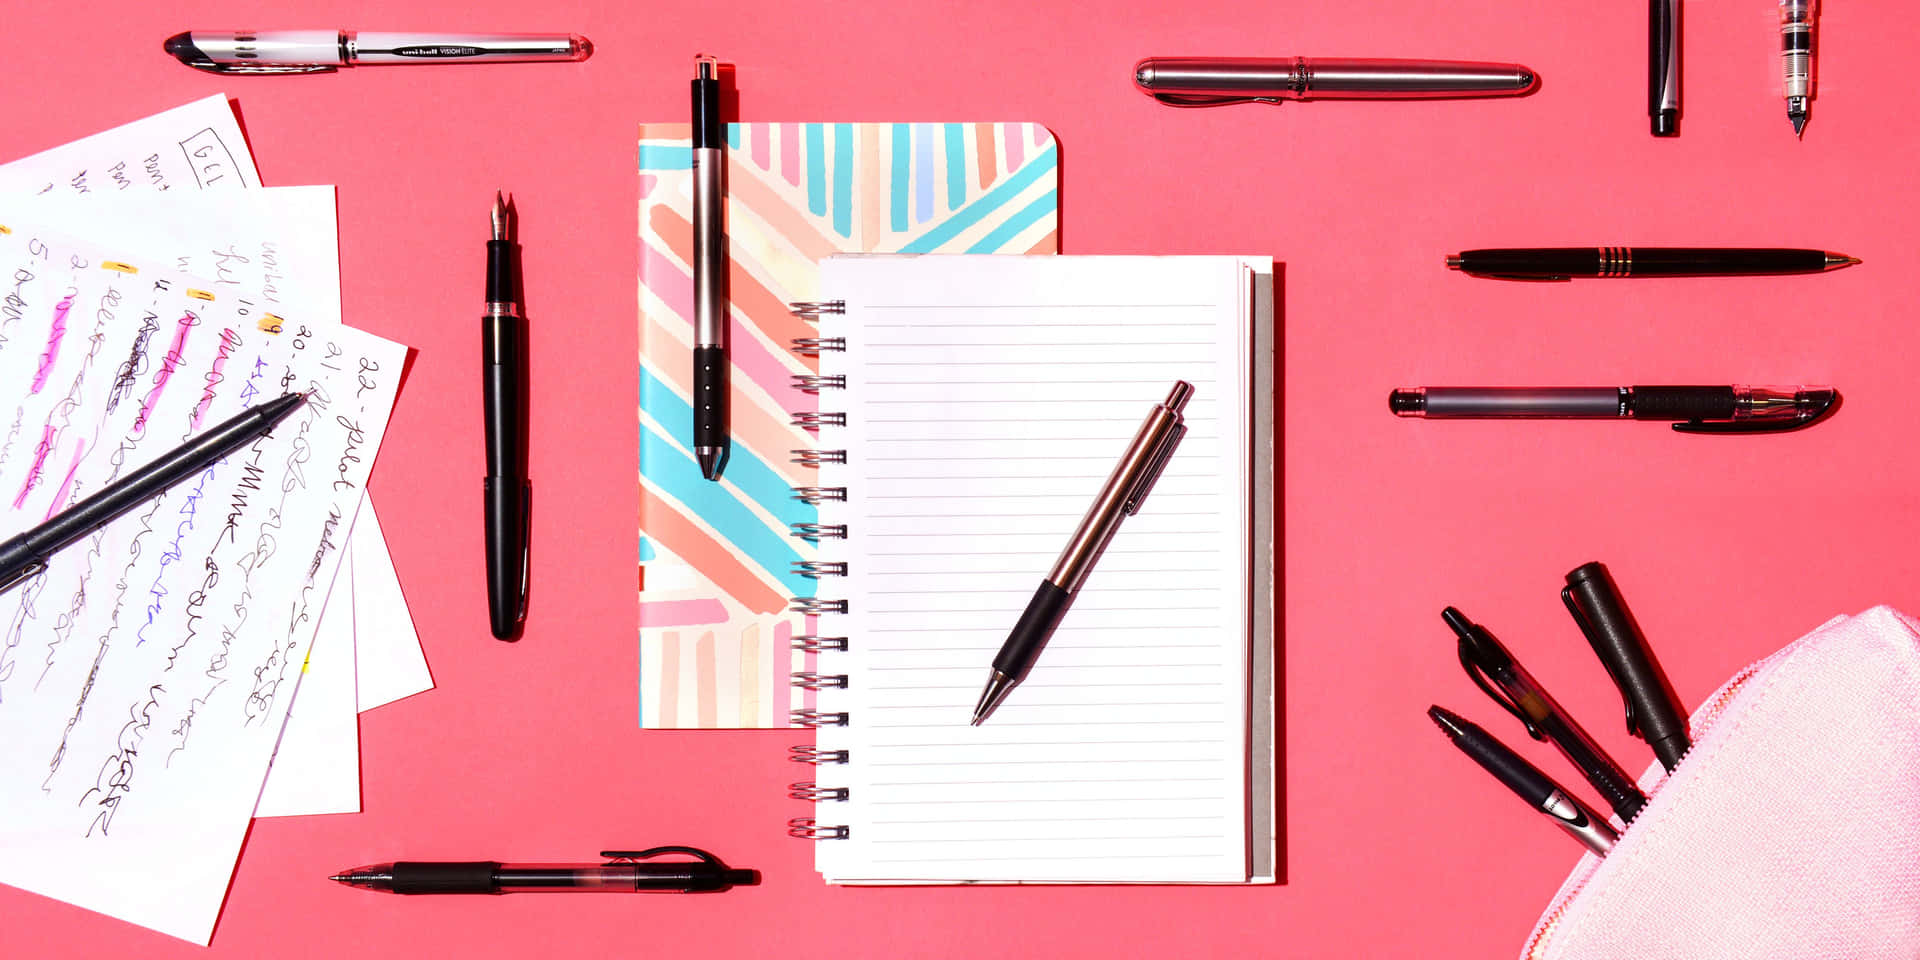 A Notebook, Pen, Pencil, And Other Writing Supplies On A Pink Background